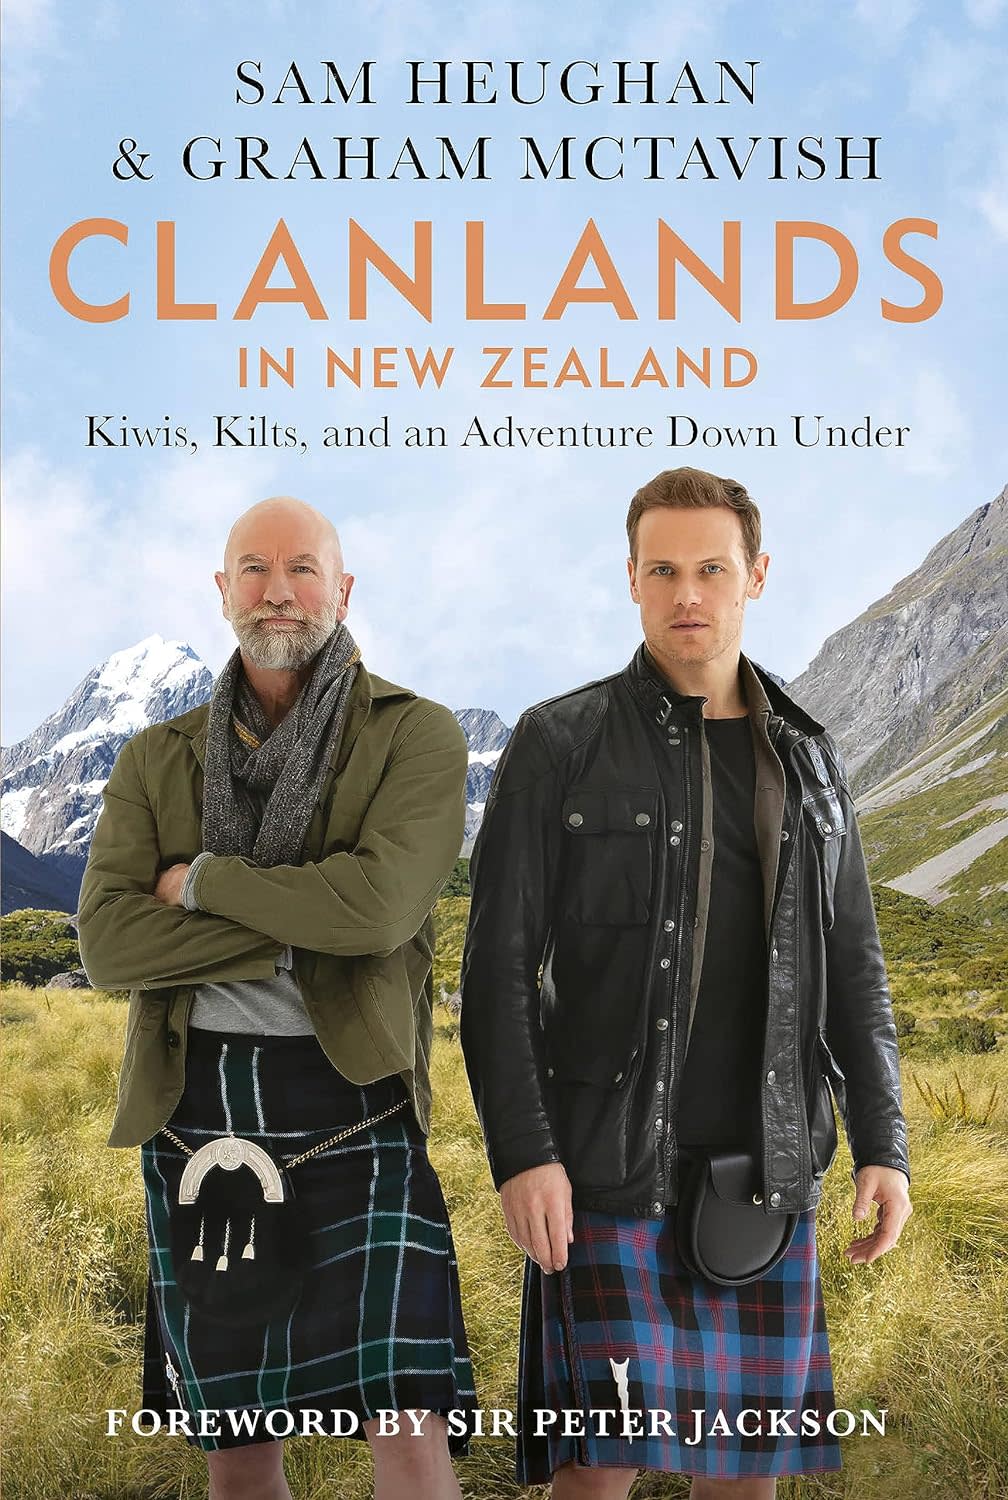 Actor and author Graham McTavish will be signing copies of his newest collaboration "Clanslands in New Zealand Kiwis, Kilts, and an Adventure Down Under" Sunday, Nov. 12, 2023 at 4 p.m. at PLainview Barnes and Noble.